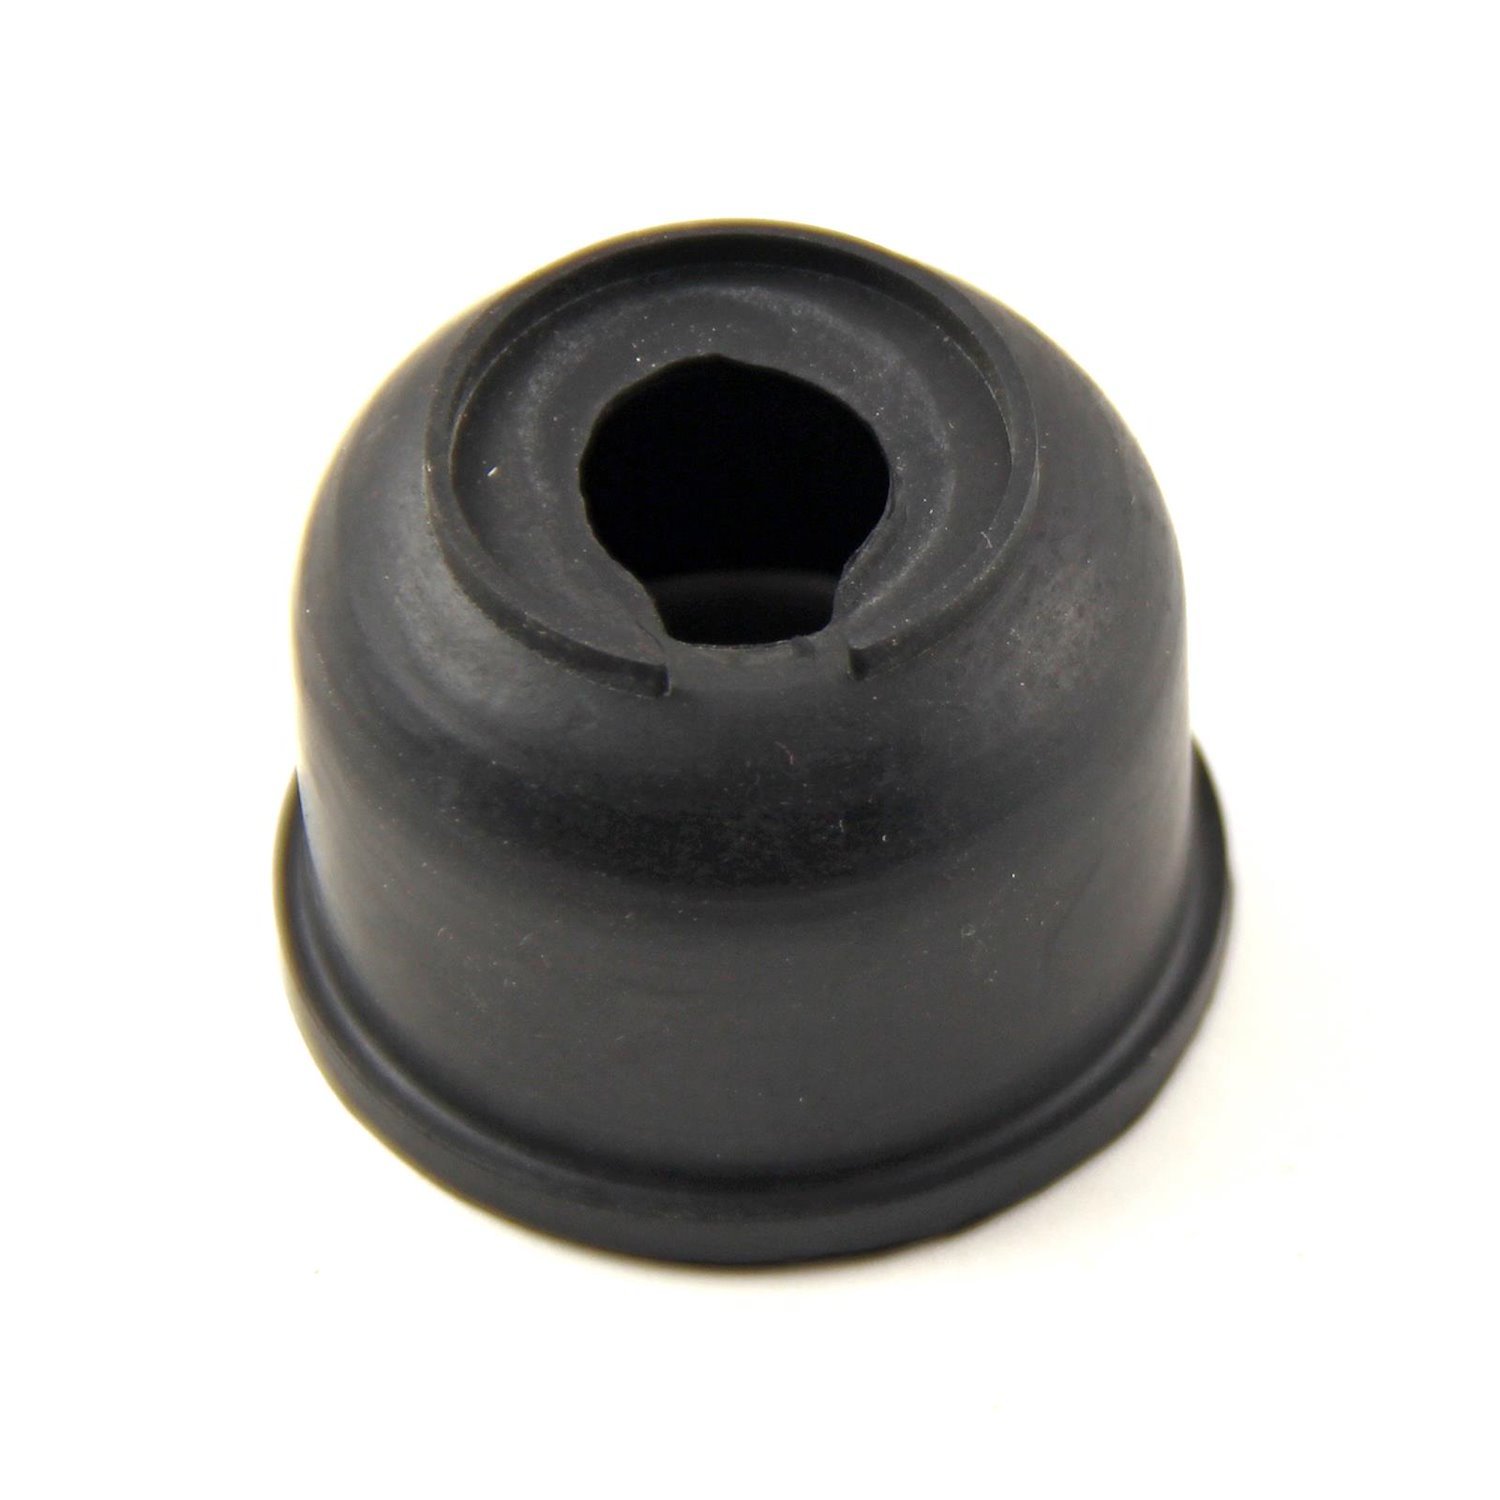 Replacement Balljoint Boot For Tds4003 A-Arms